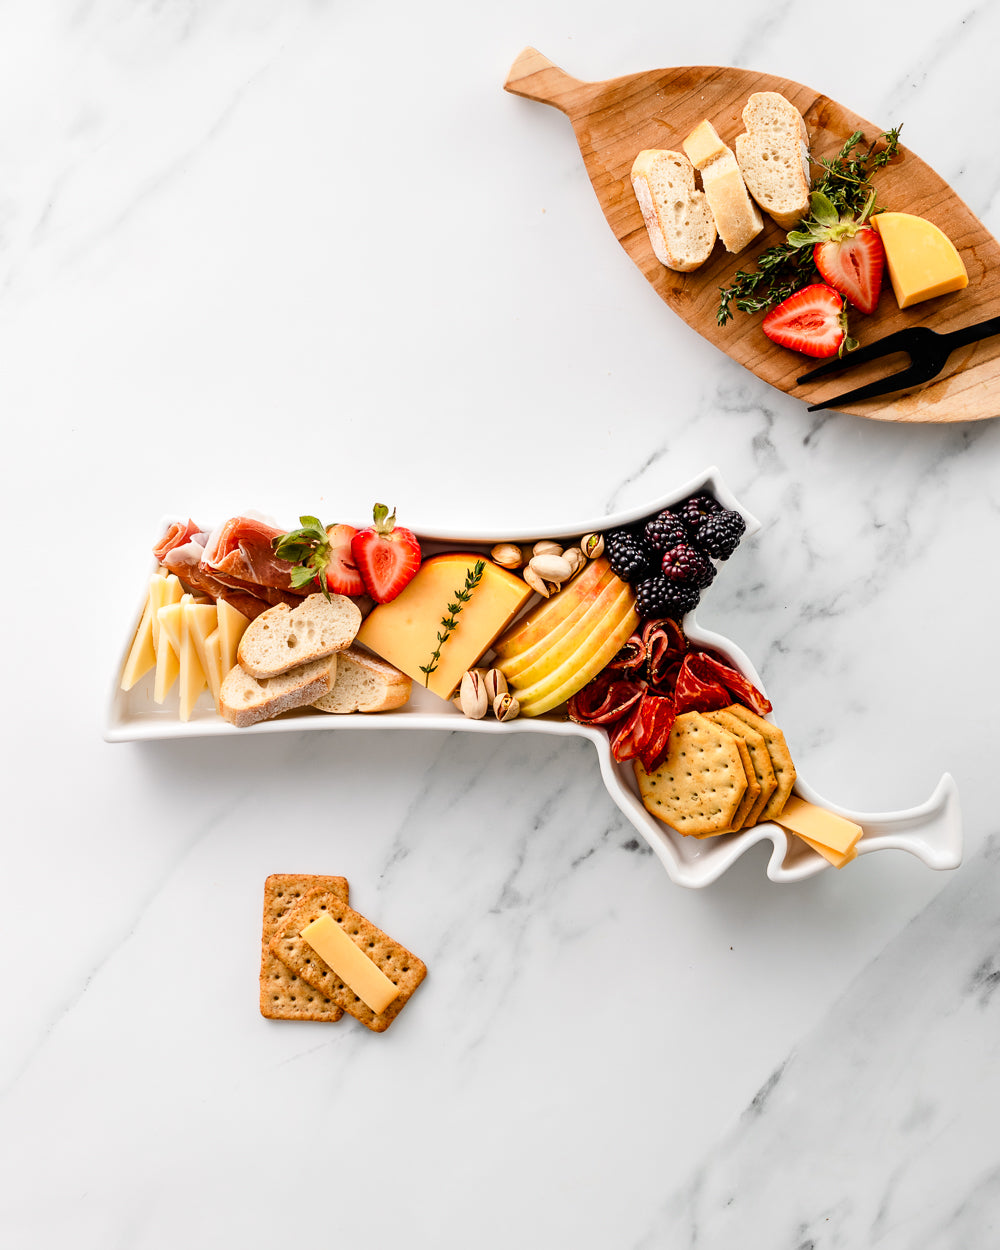 charcuterie board with cheese and cured meats in a Massachusetts shaped serving tray platter dish